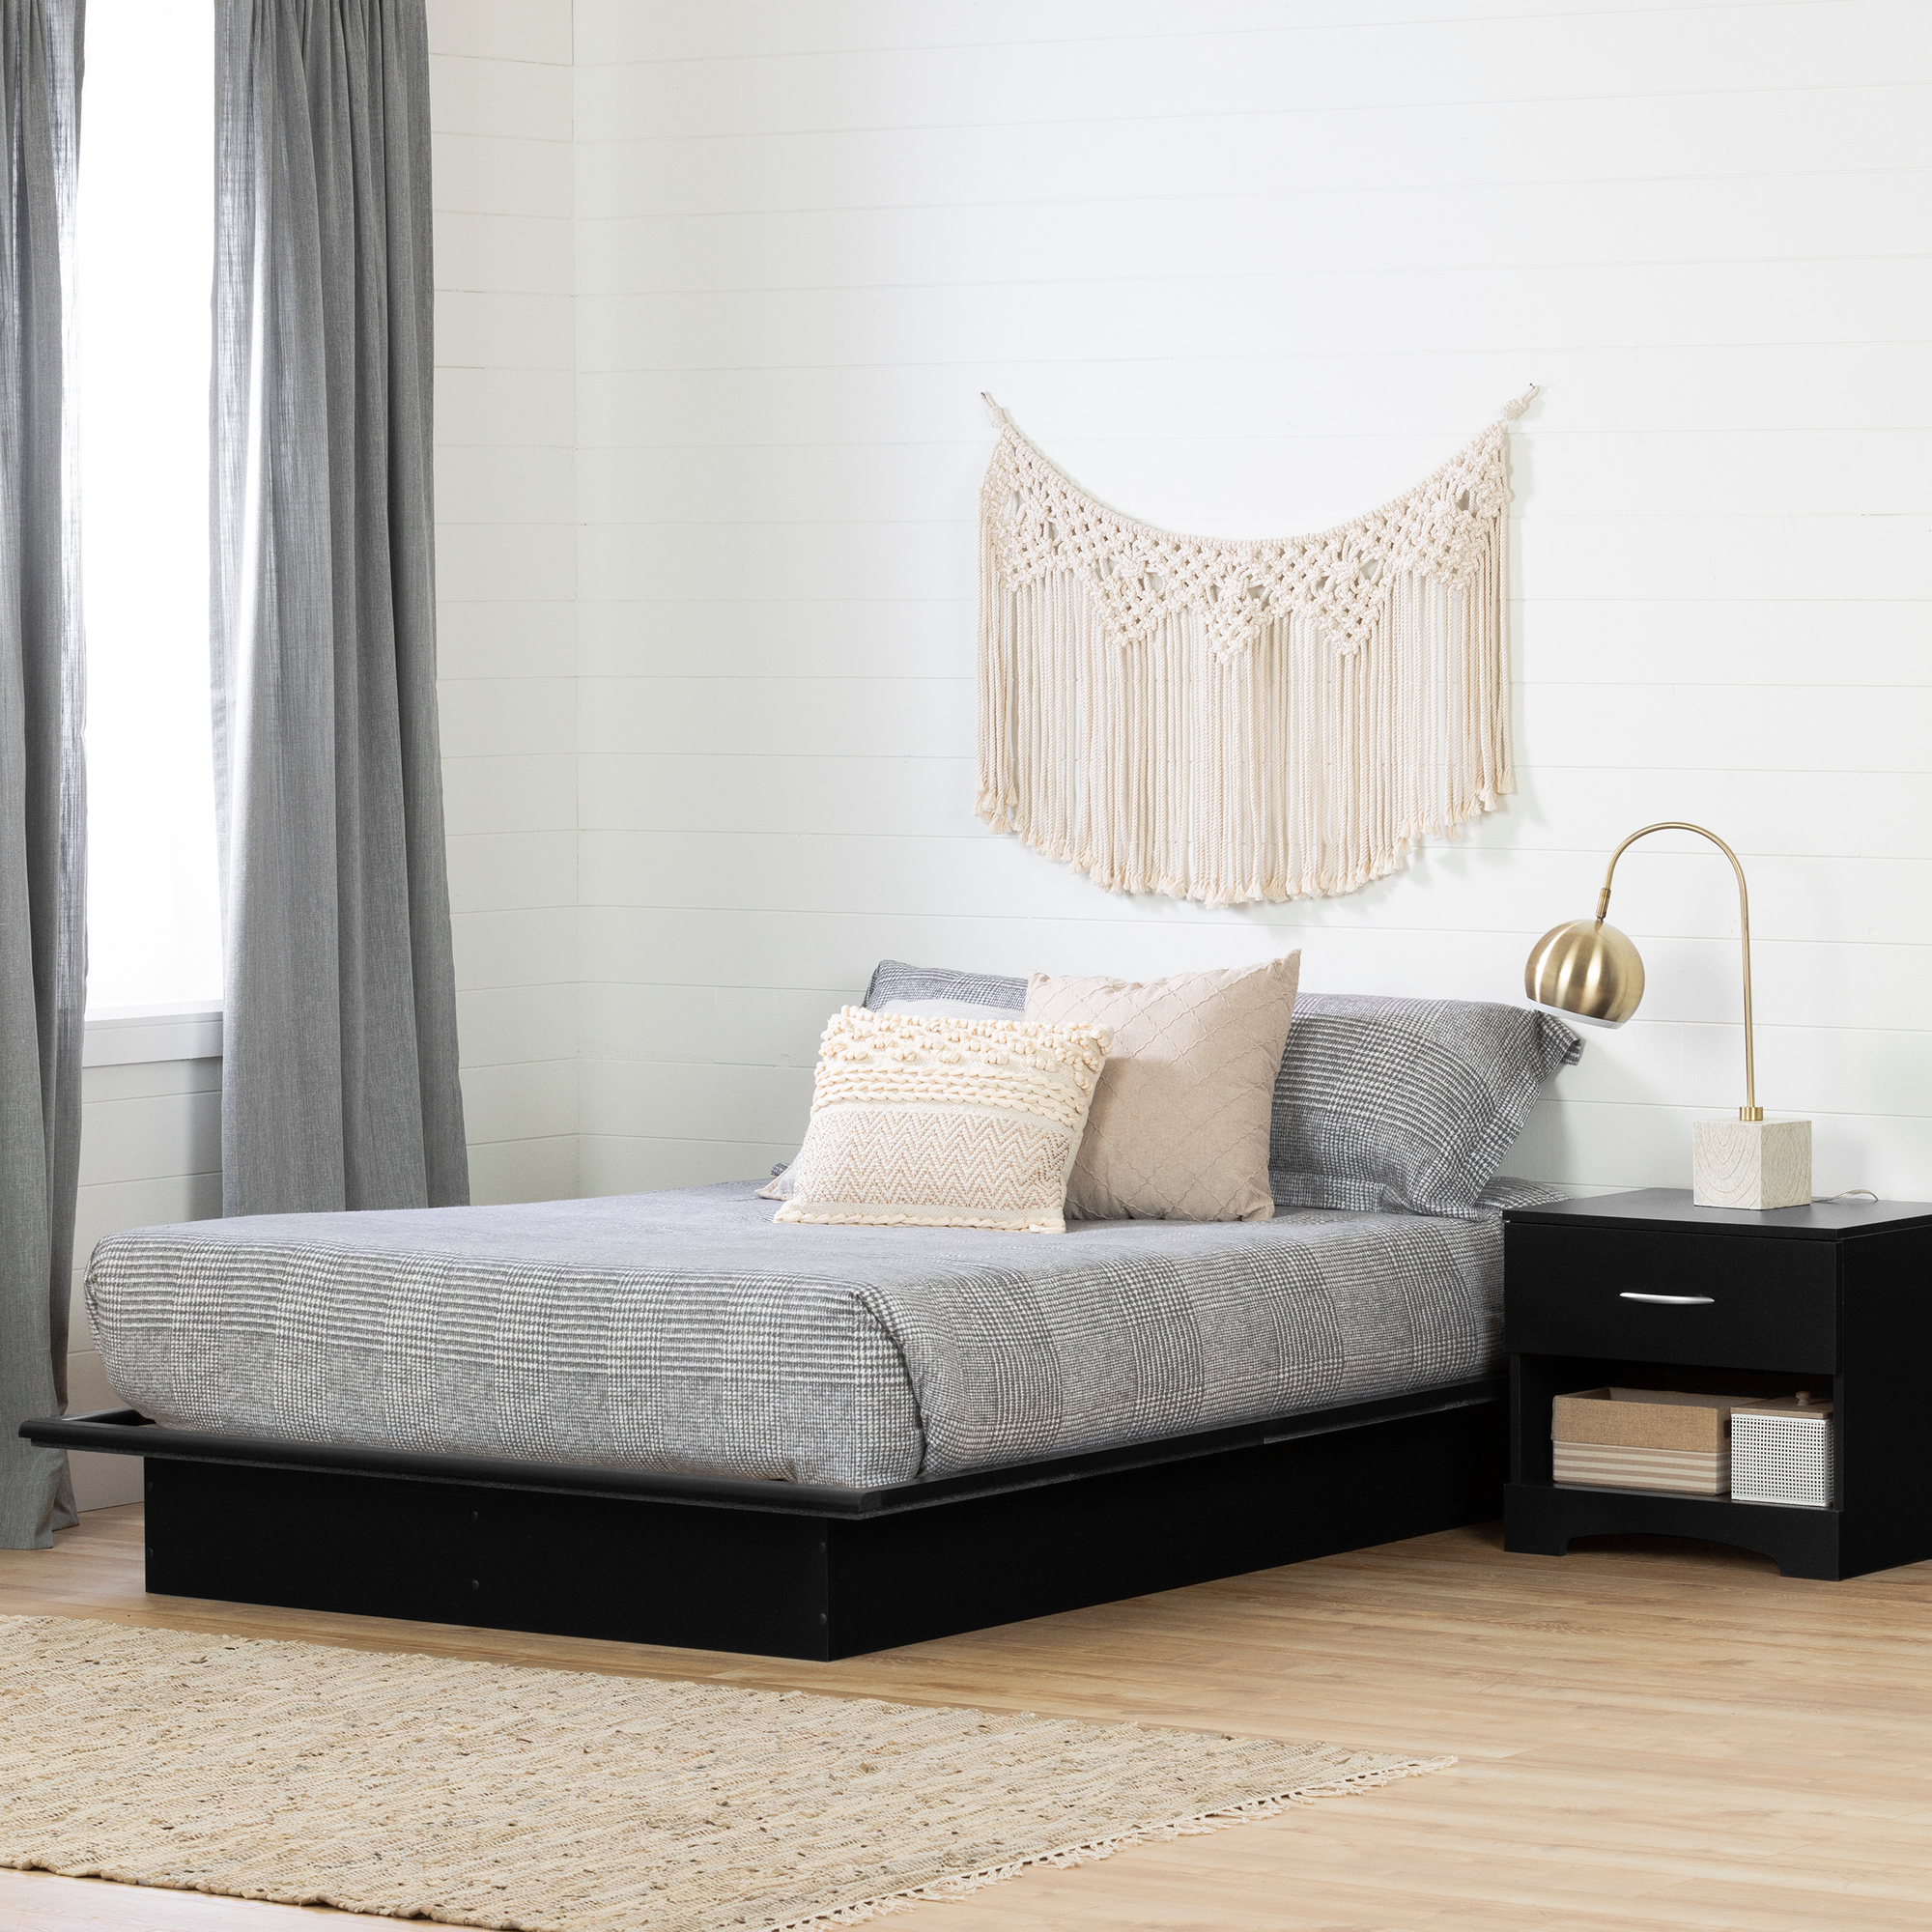 South Shore Basics Platform Bed with Molding, Pure Black, Full - image 1 of 7